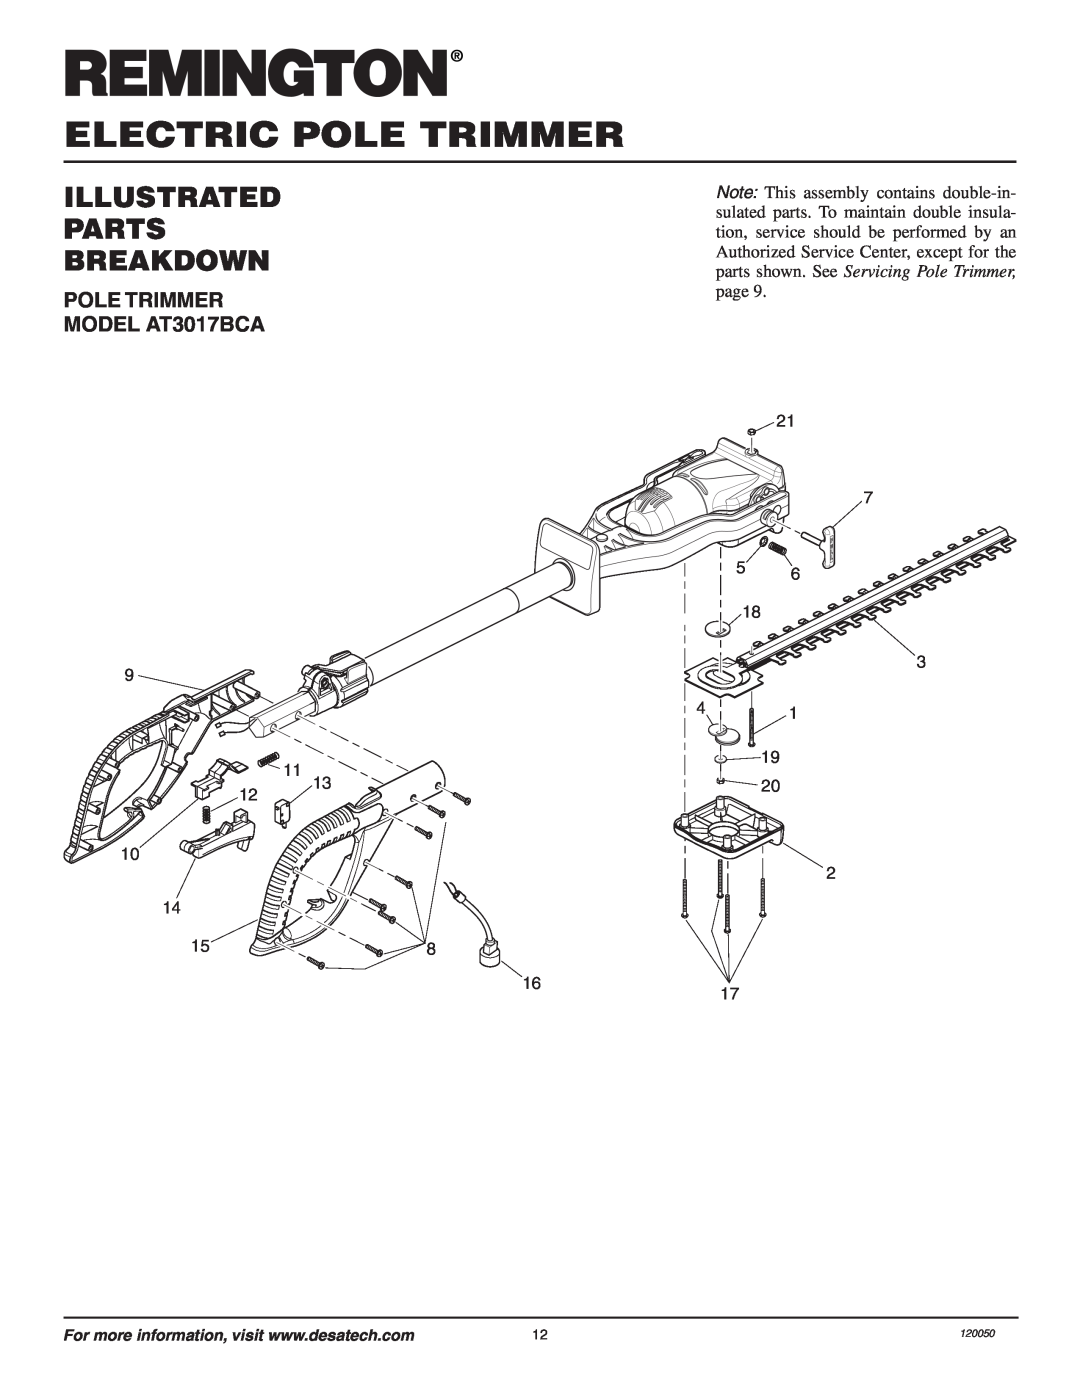 Remington owner manual Illustrated Parts Breakdown, Electric Pole Trimmer, POLE TRIMMER MODEL AT3017BCA 